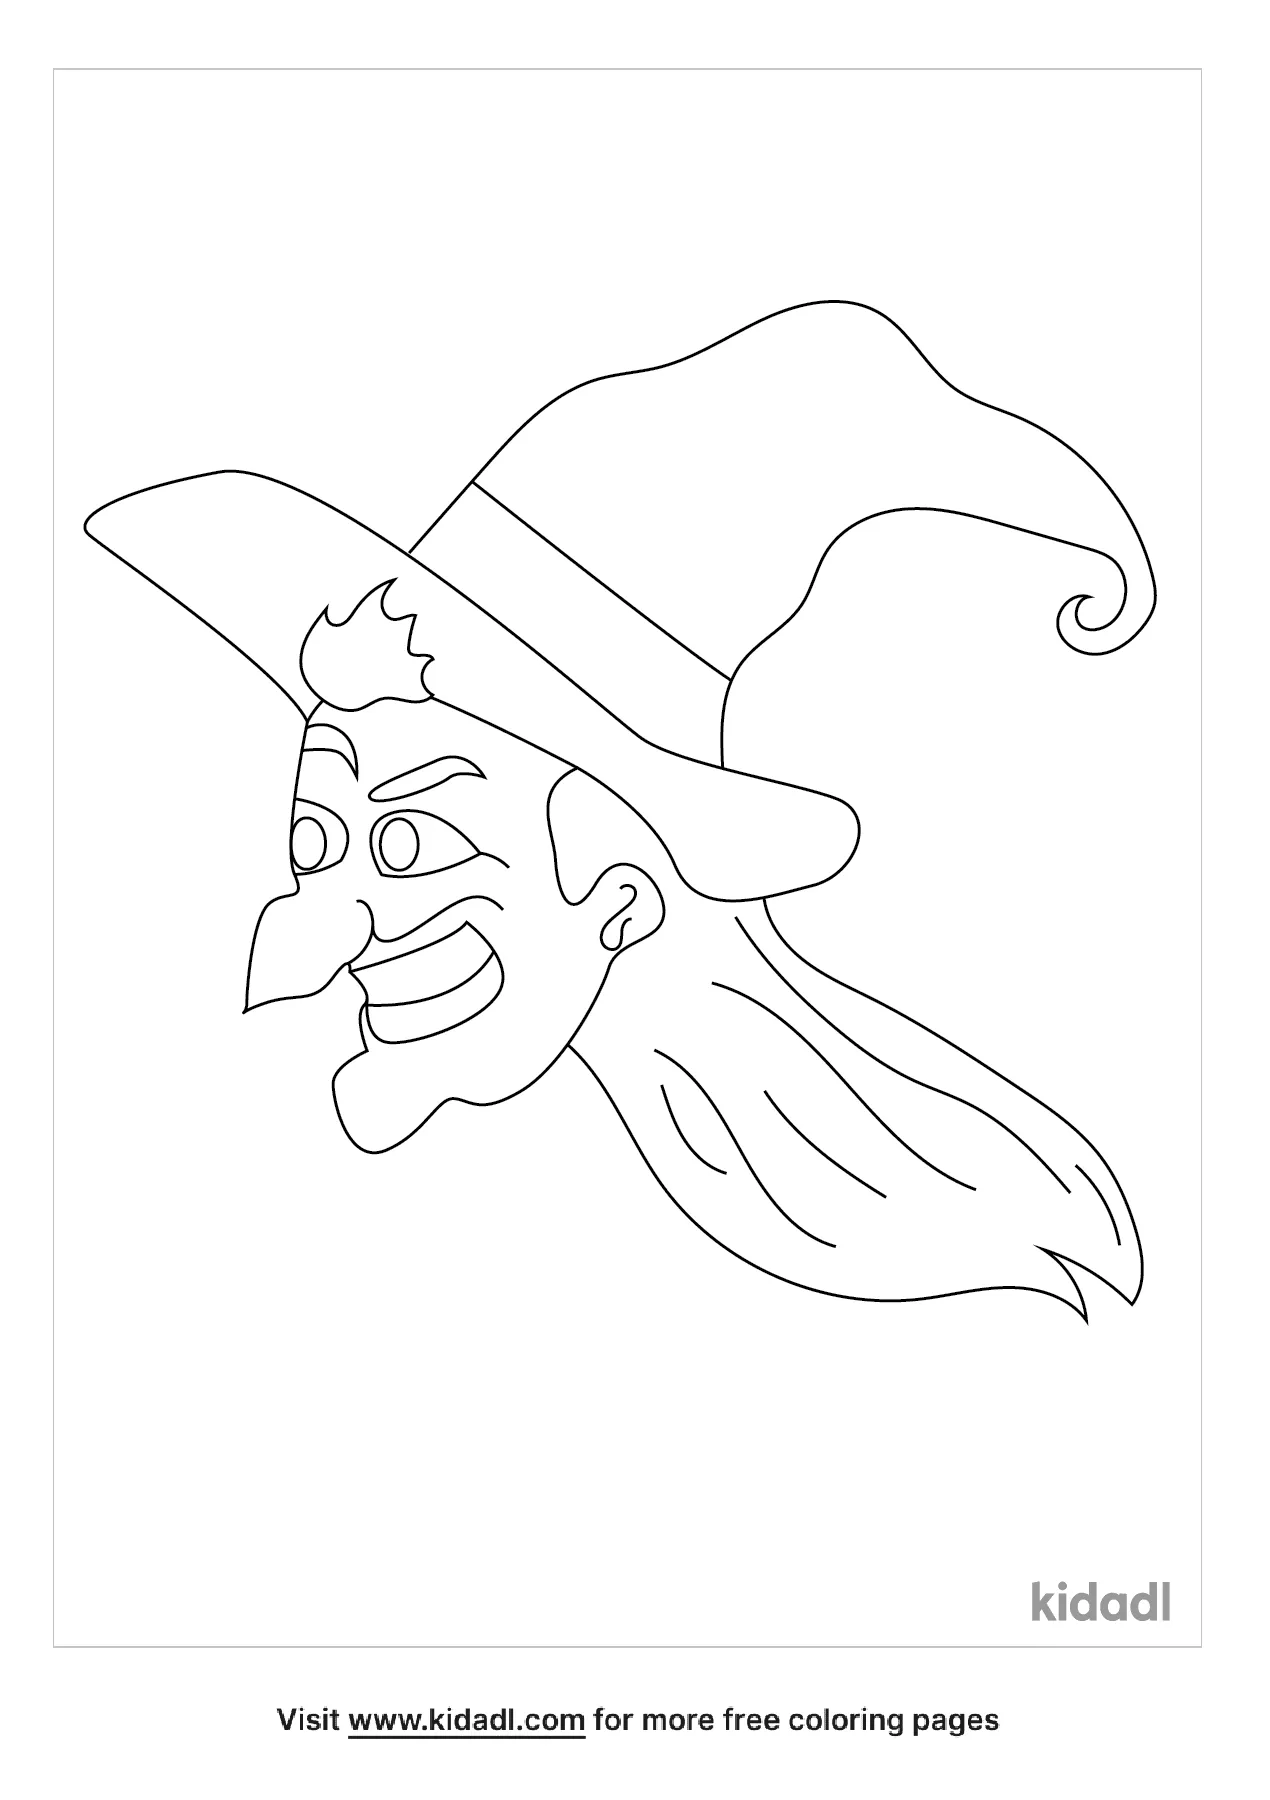 witch face coloring pages